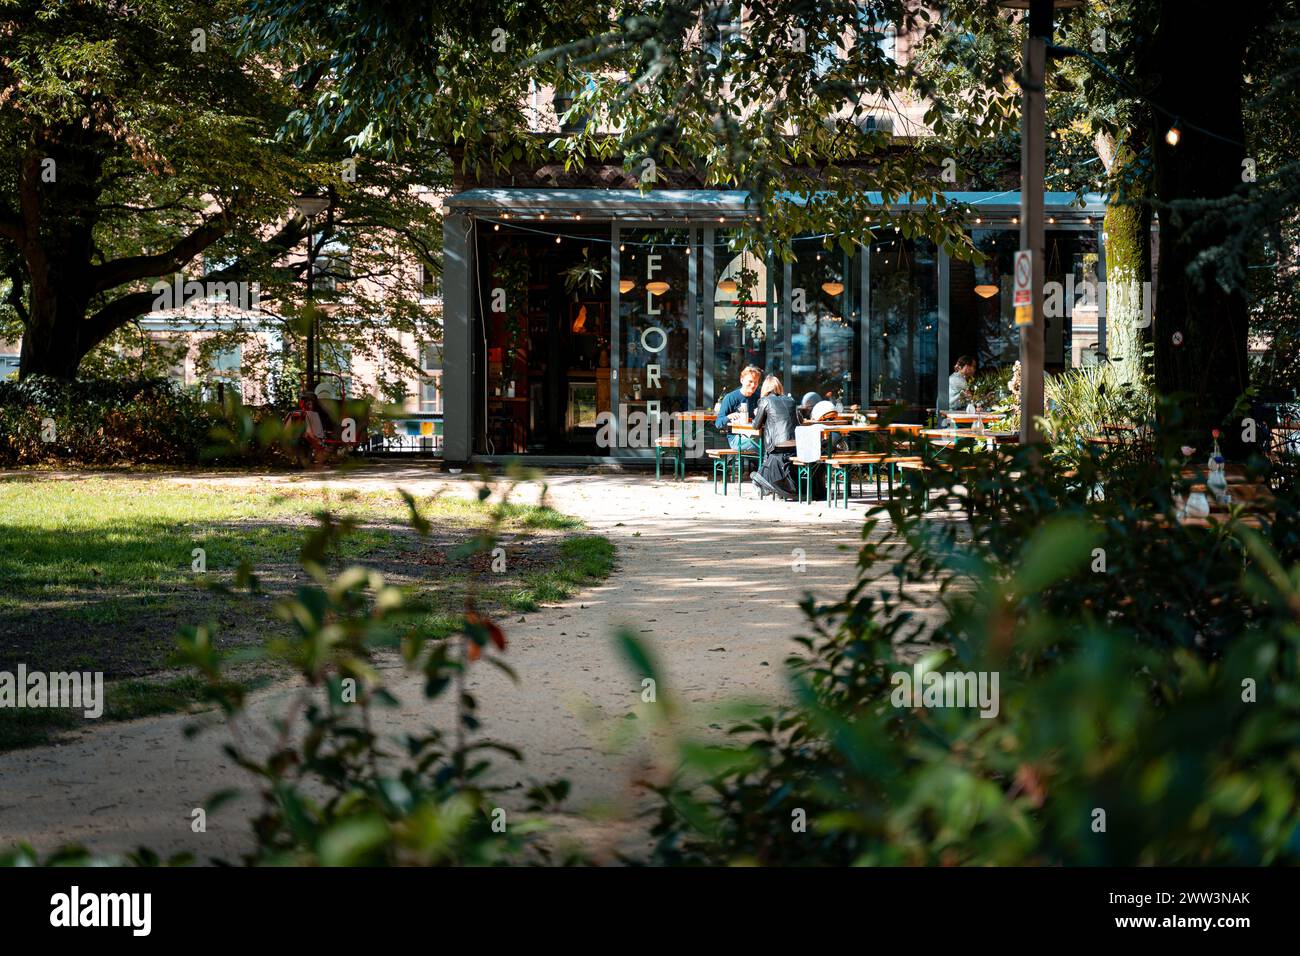 A cozy café nestled among trees in a serene park setting with patrons enjoying outdoors Stock Photo